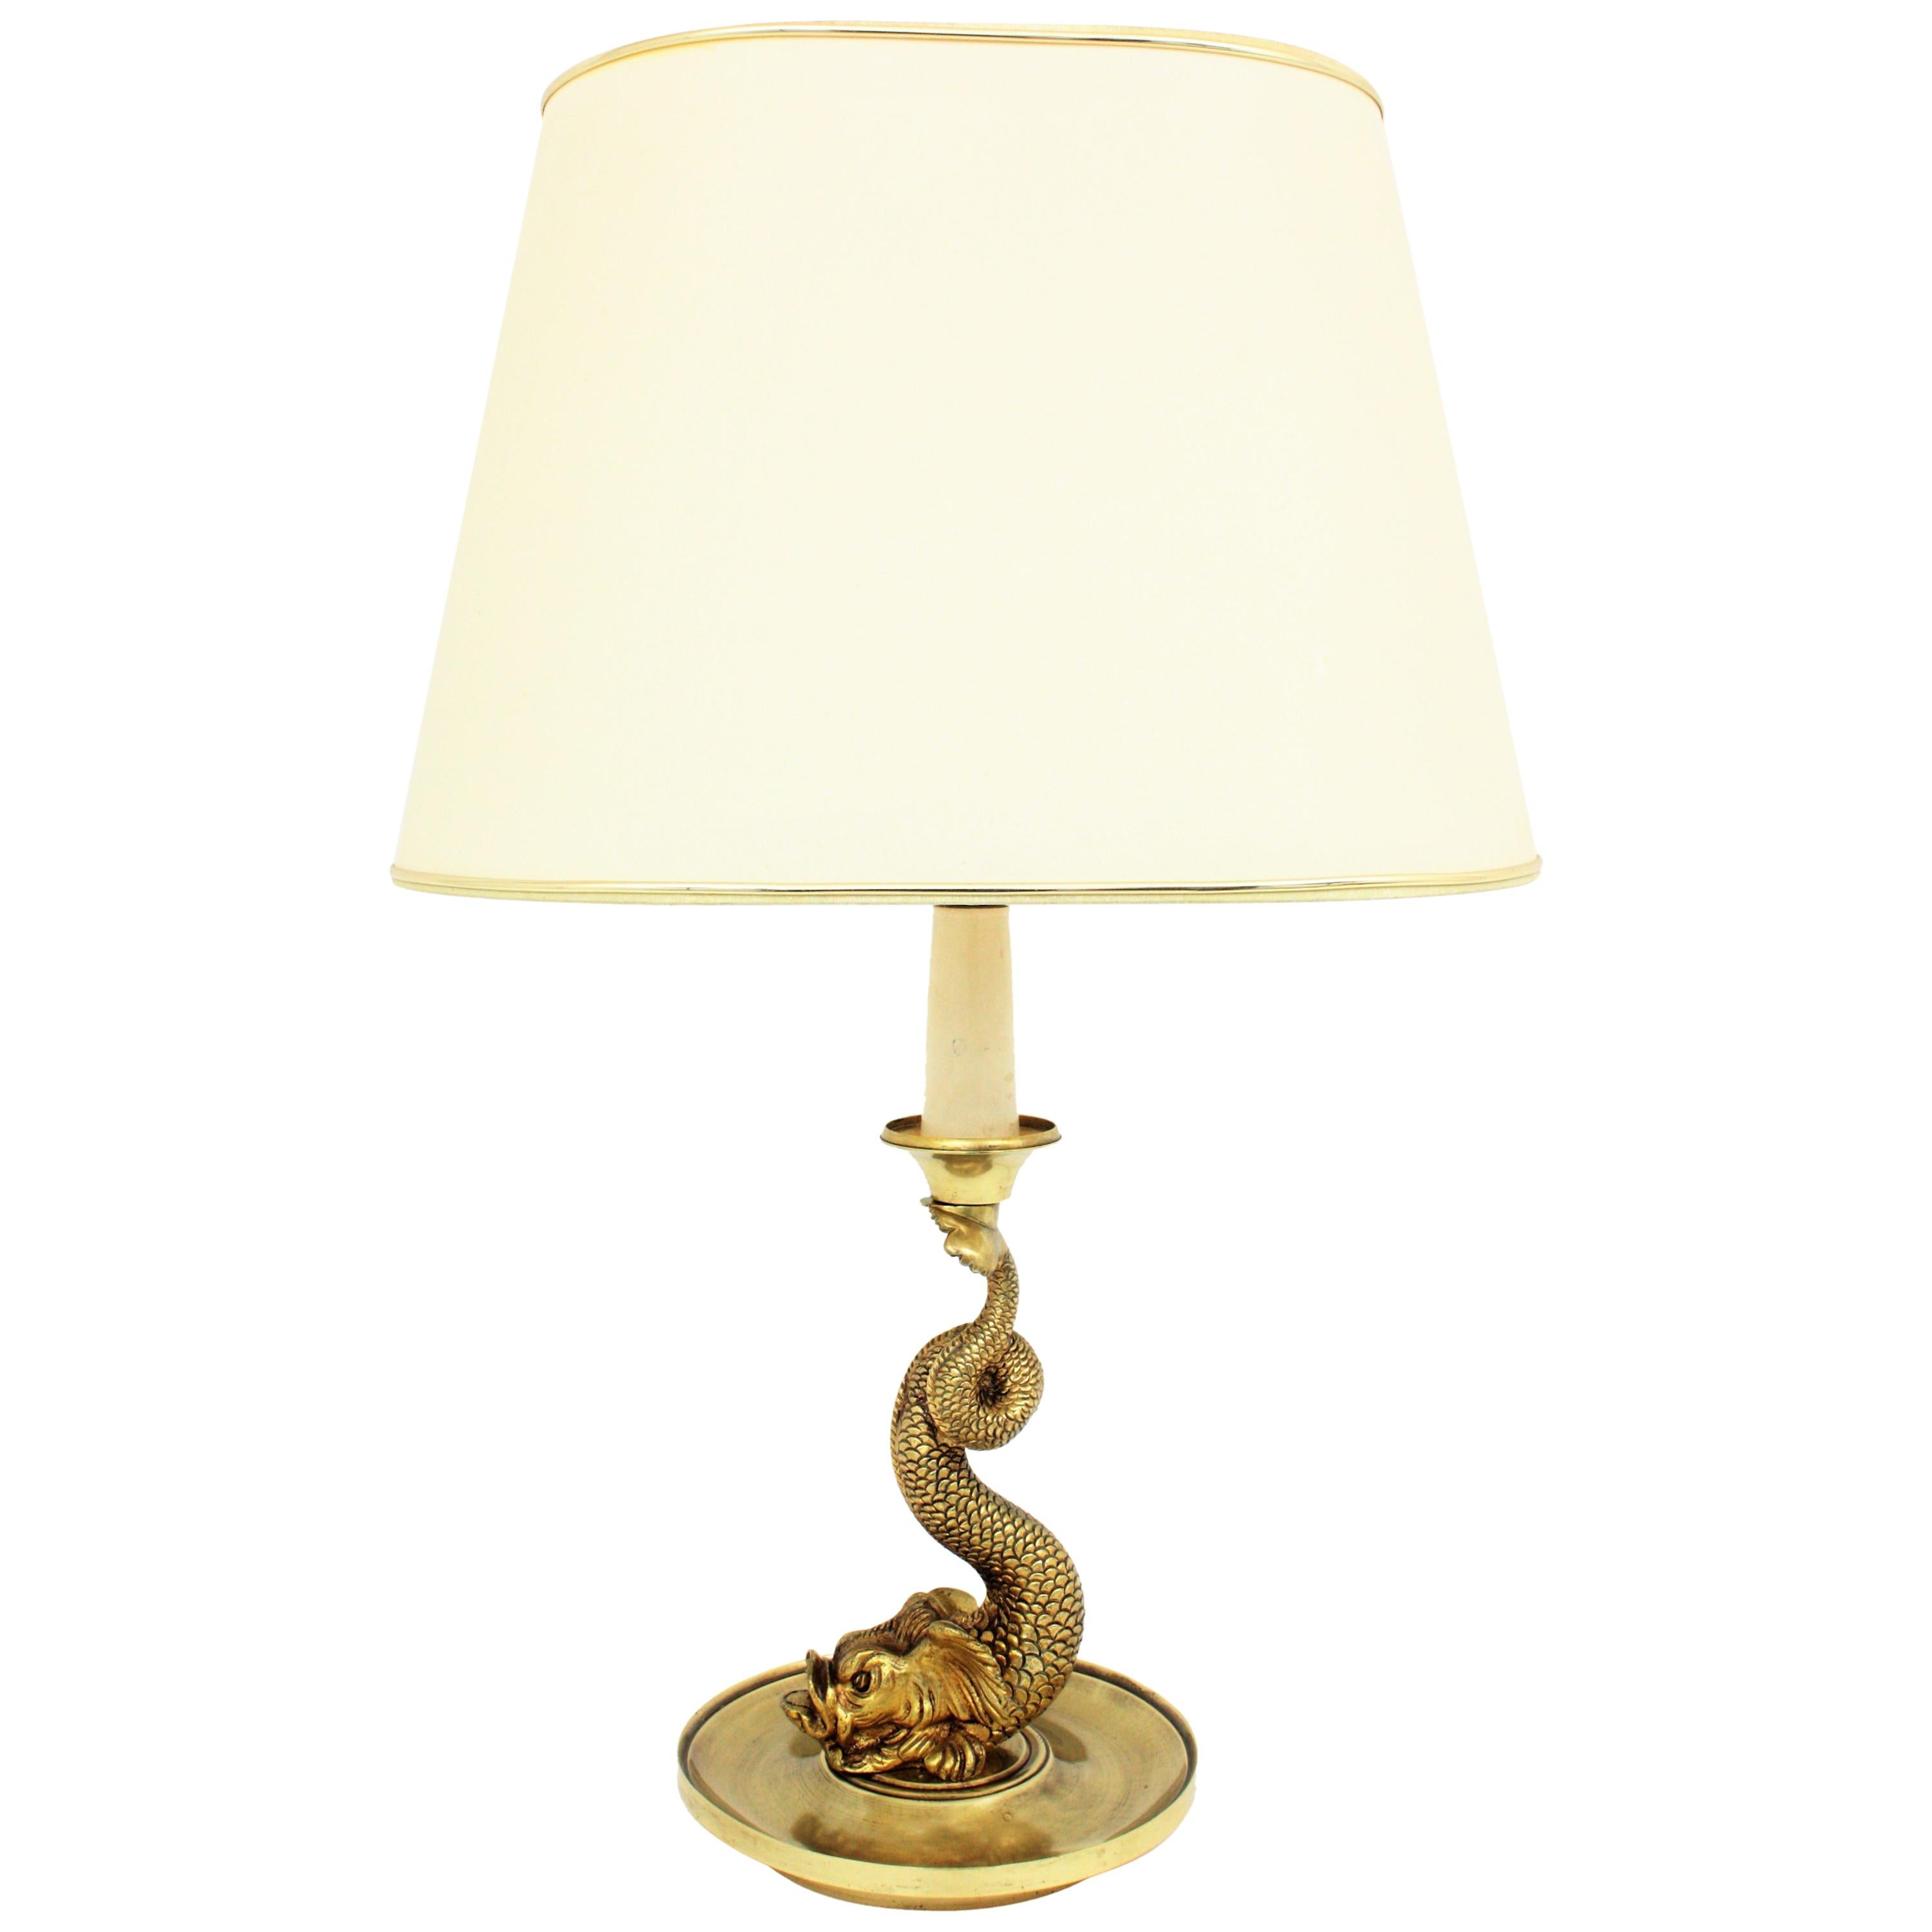 French Mid-Century Modern Koi Fish Brass Table Lamp or Desk Lamp with Shade